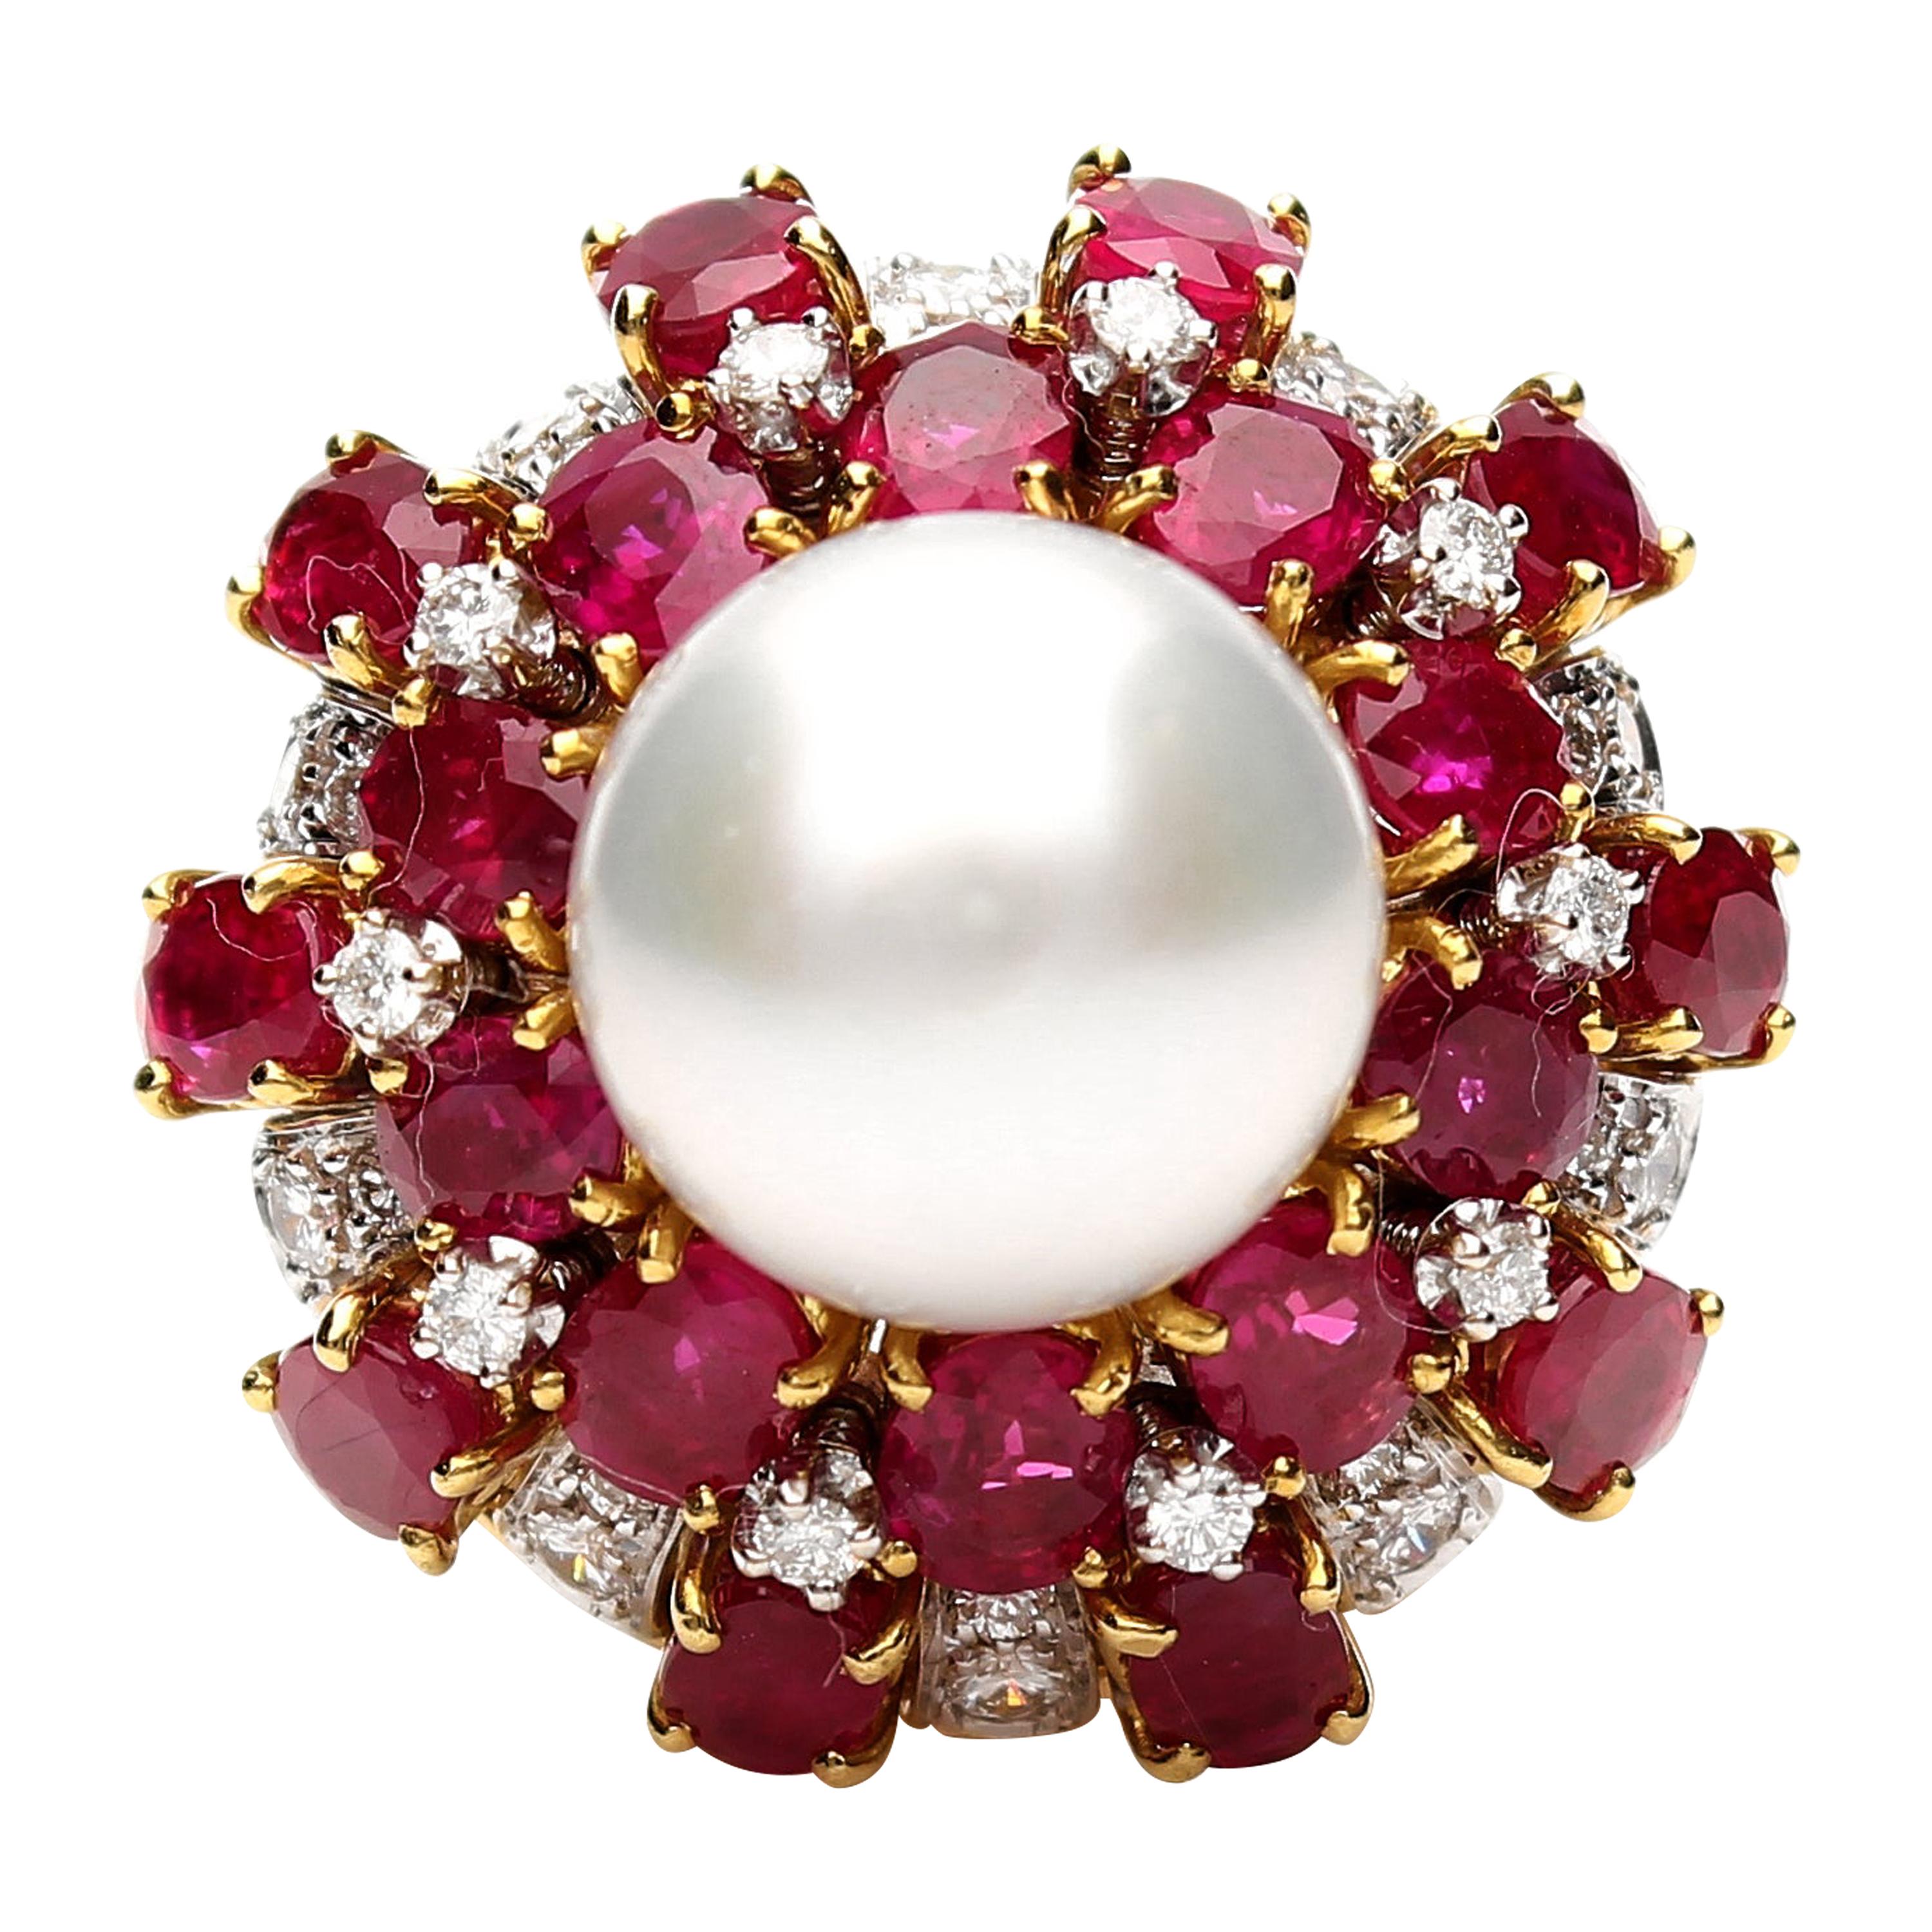 18 Karat Gold Ring with Oval Cut Rubies, Diamonds and South Sea Pearl